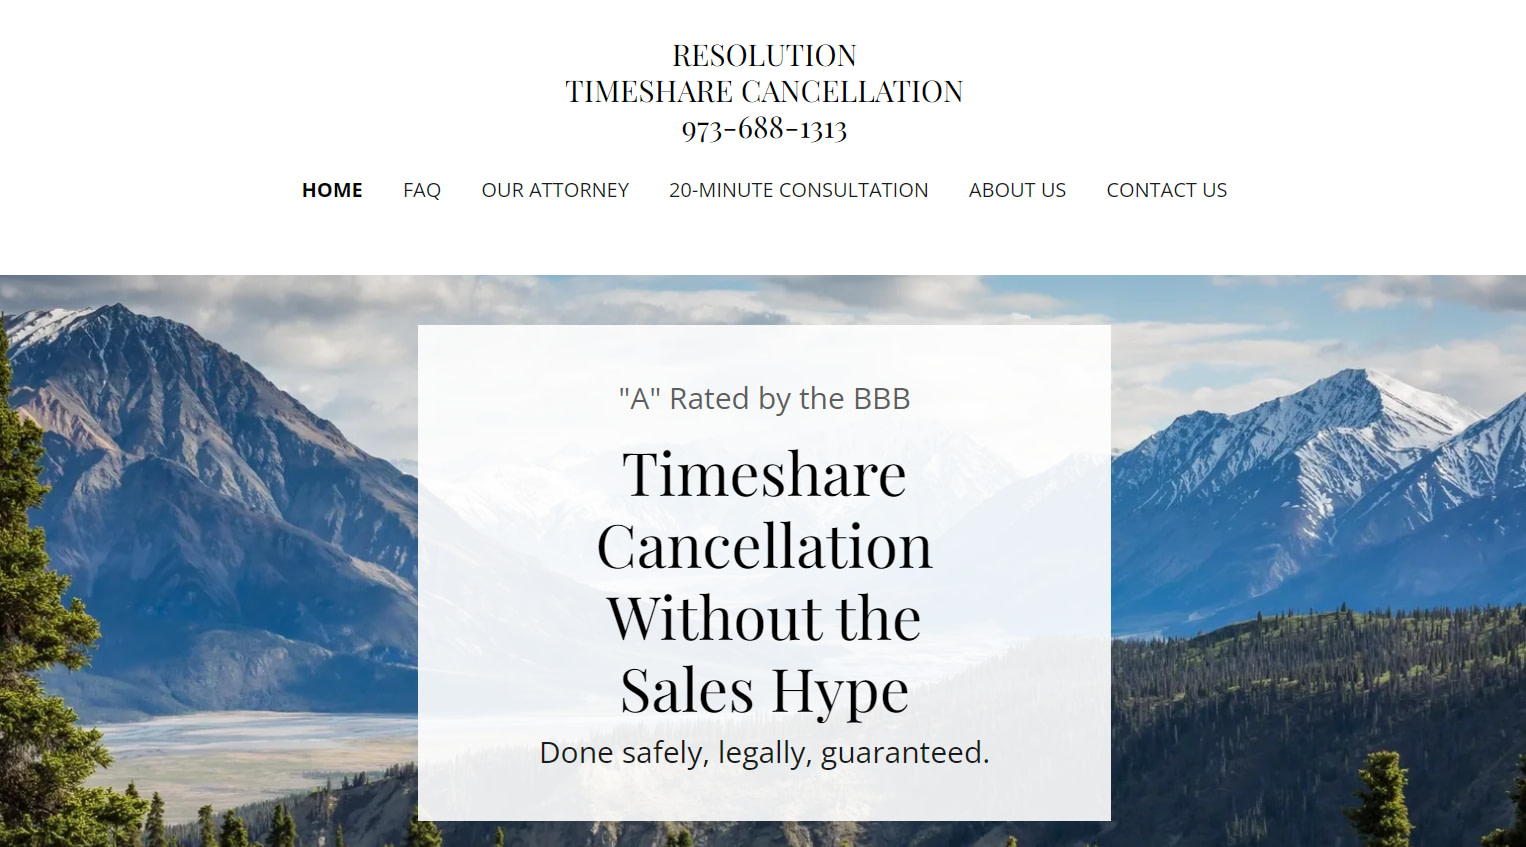 Resolution Timeshare Cancellation homepage